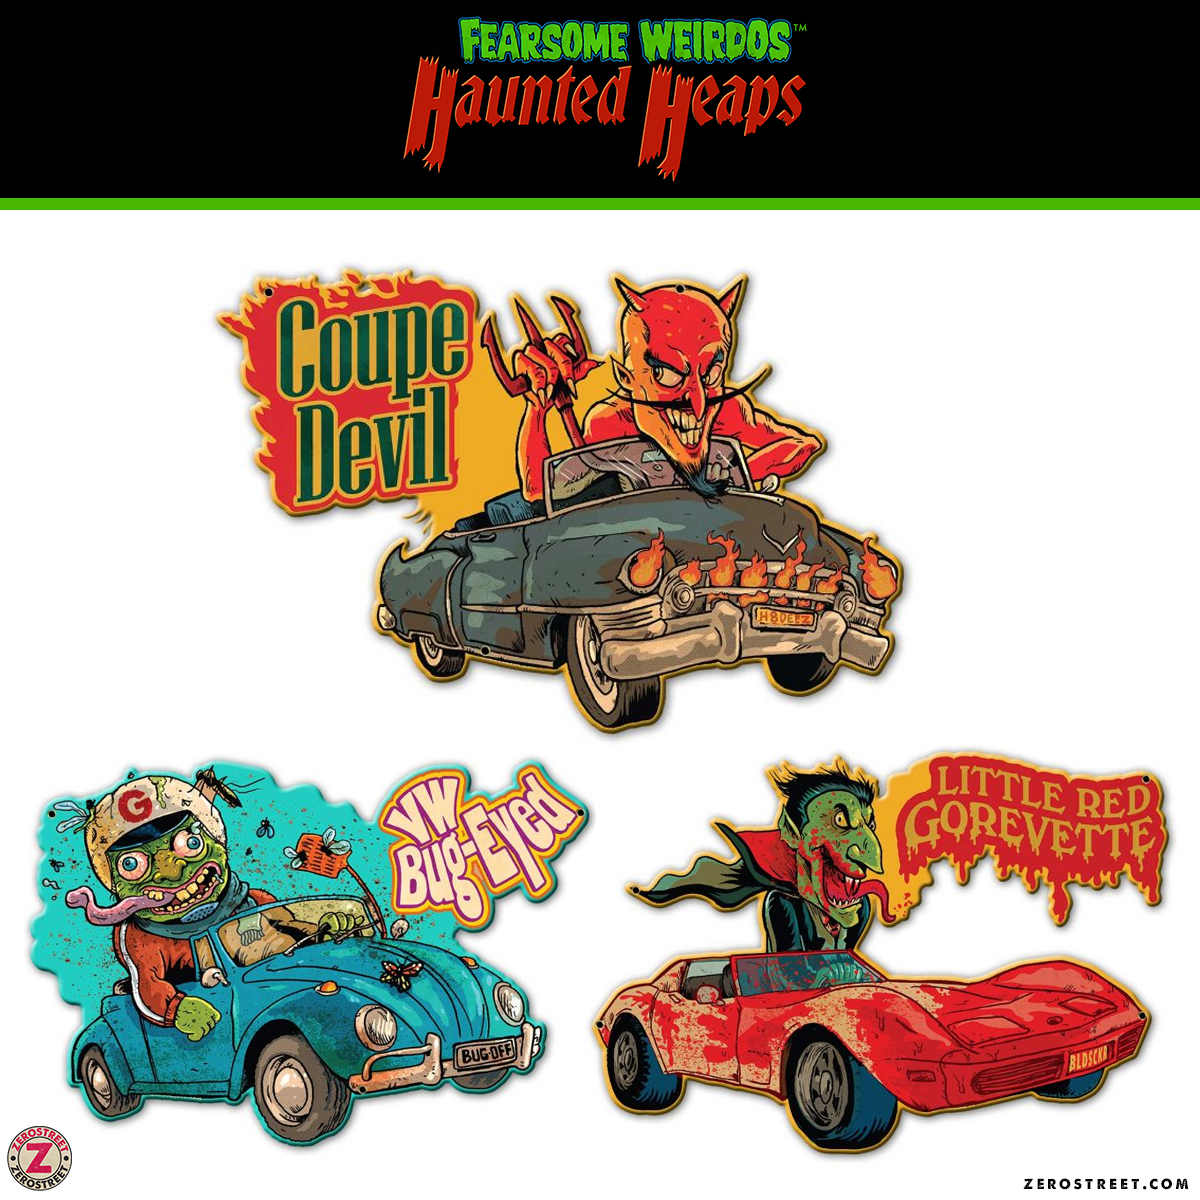 New 24' metal signs of my #FearsomeWeirdos #HauntedHeaps are now available! 

Made in the US!

ebay.com/itm/2257776260…

#vintage #metalsign #monsters #cars #corvette #coupedeville #amcgremlin